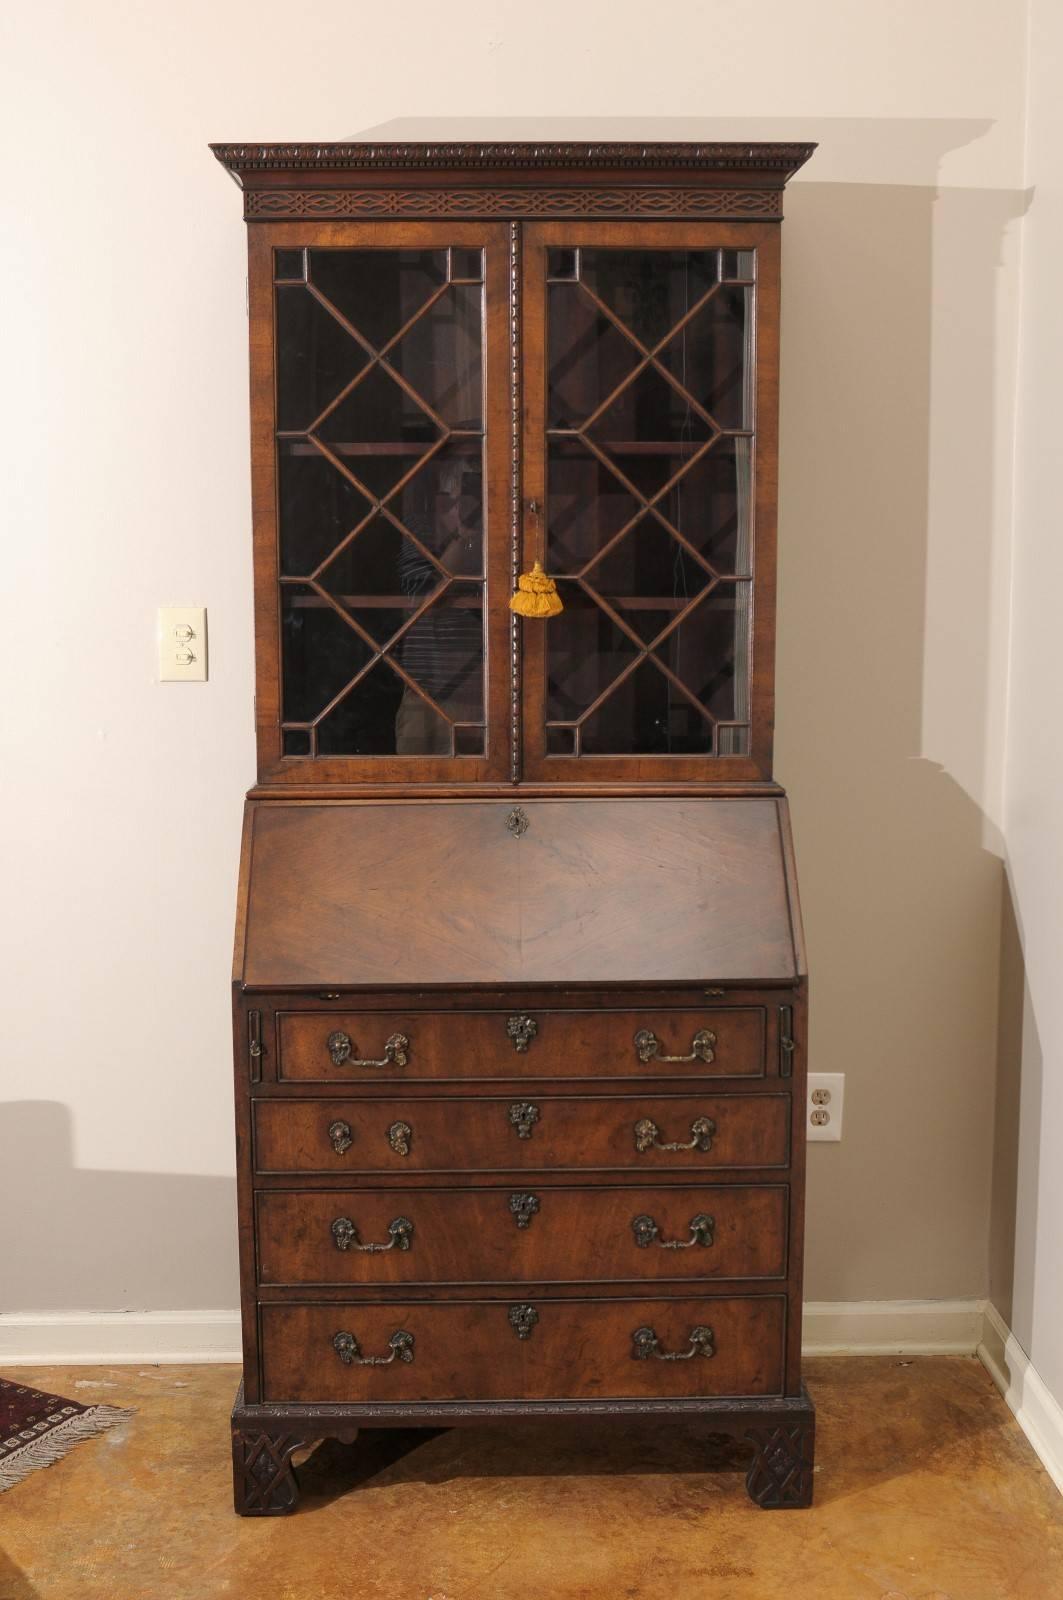 This lovely small mahogany Chippendale style secretary has beautiful fretwork and molding on the crown and on the shaped bottom and legs.
The interior has an assortment of drawers and pigeonholes. Below the slant front are two smaller drawers over